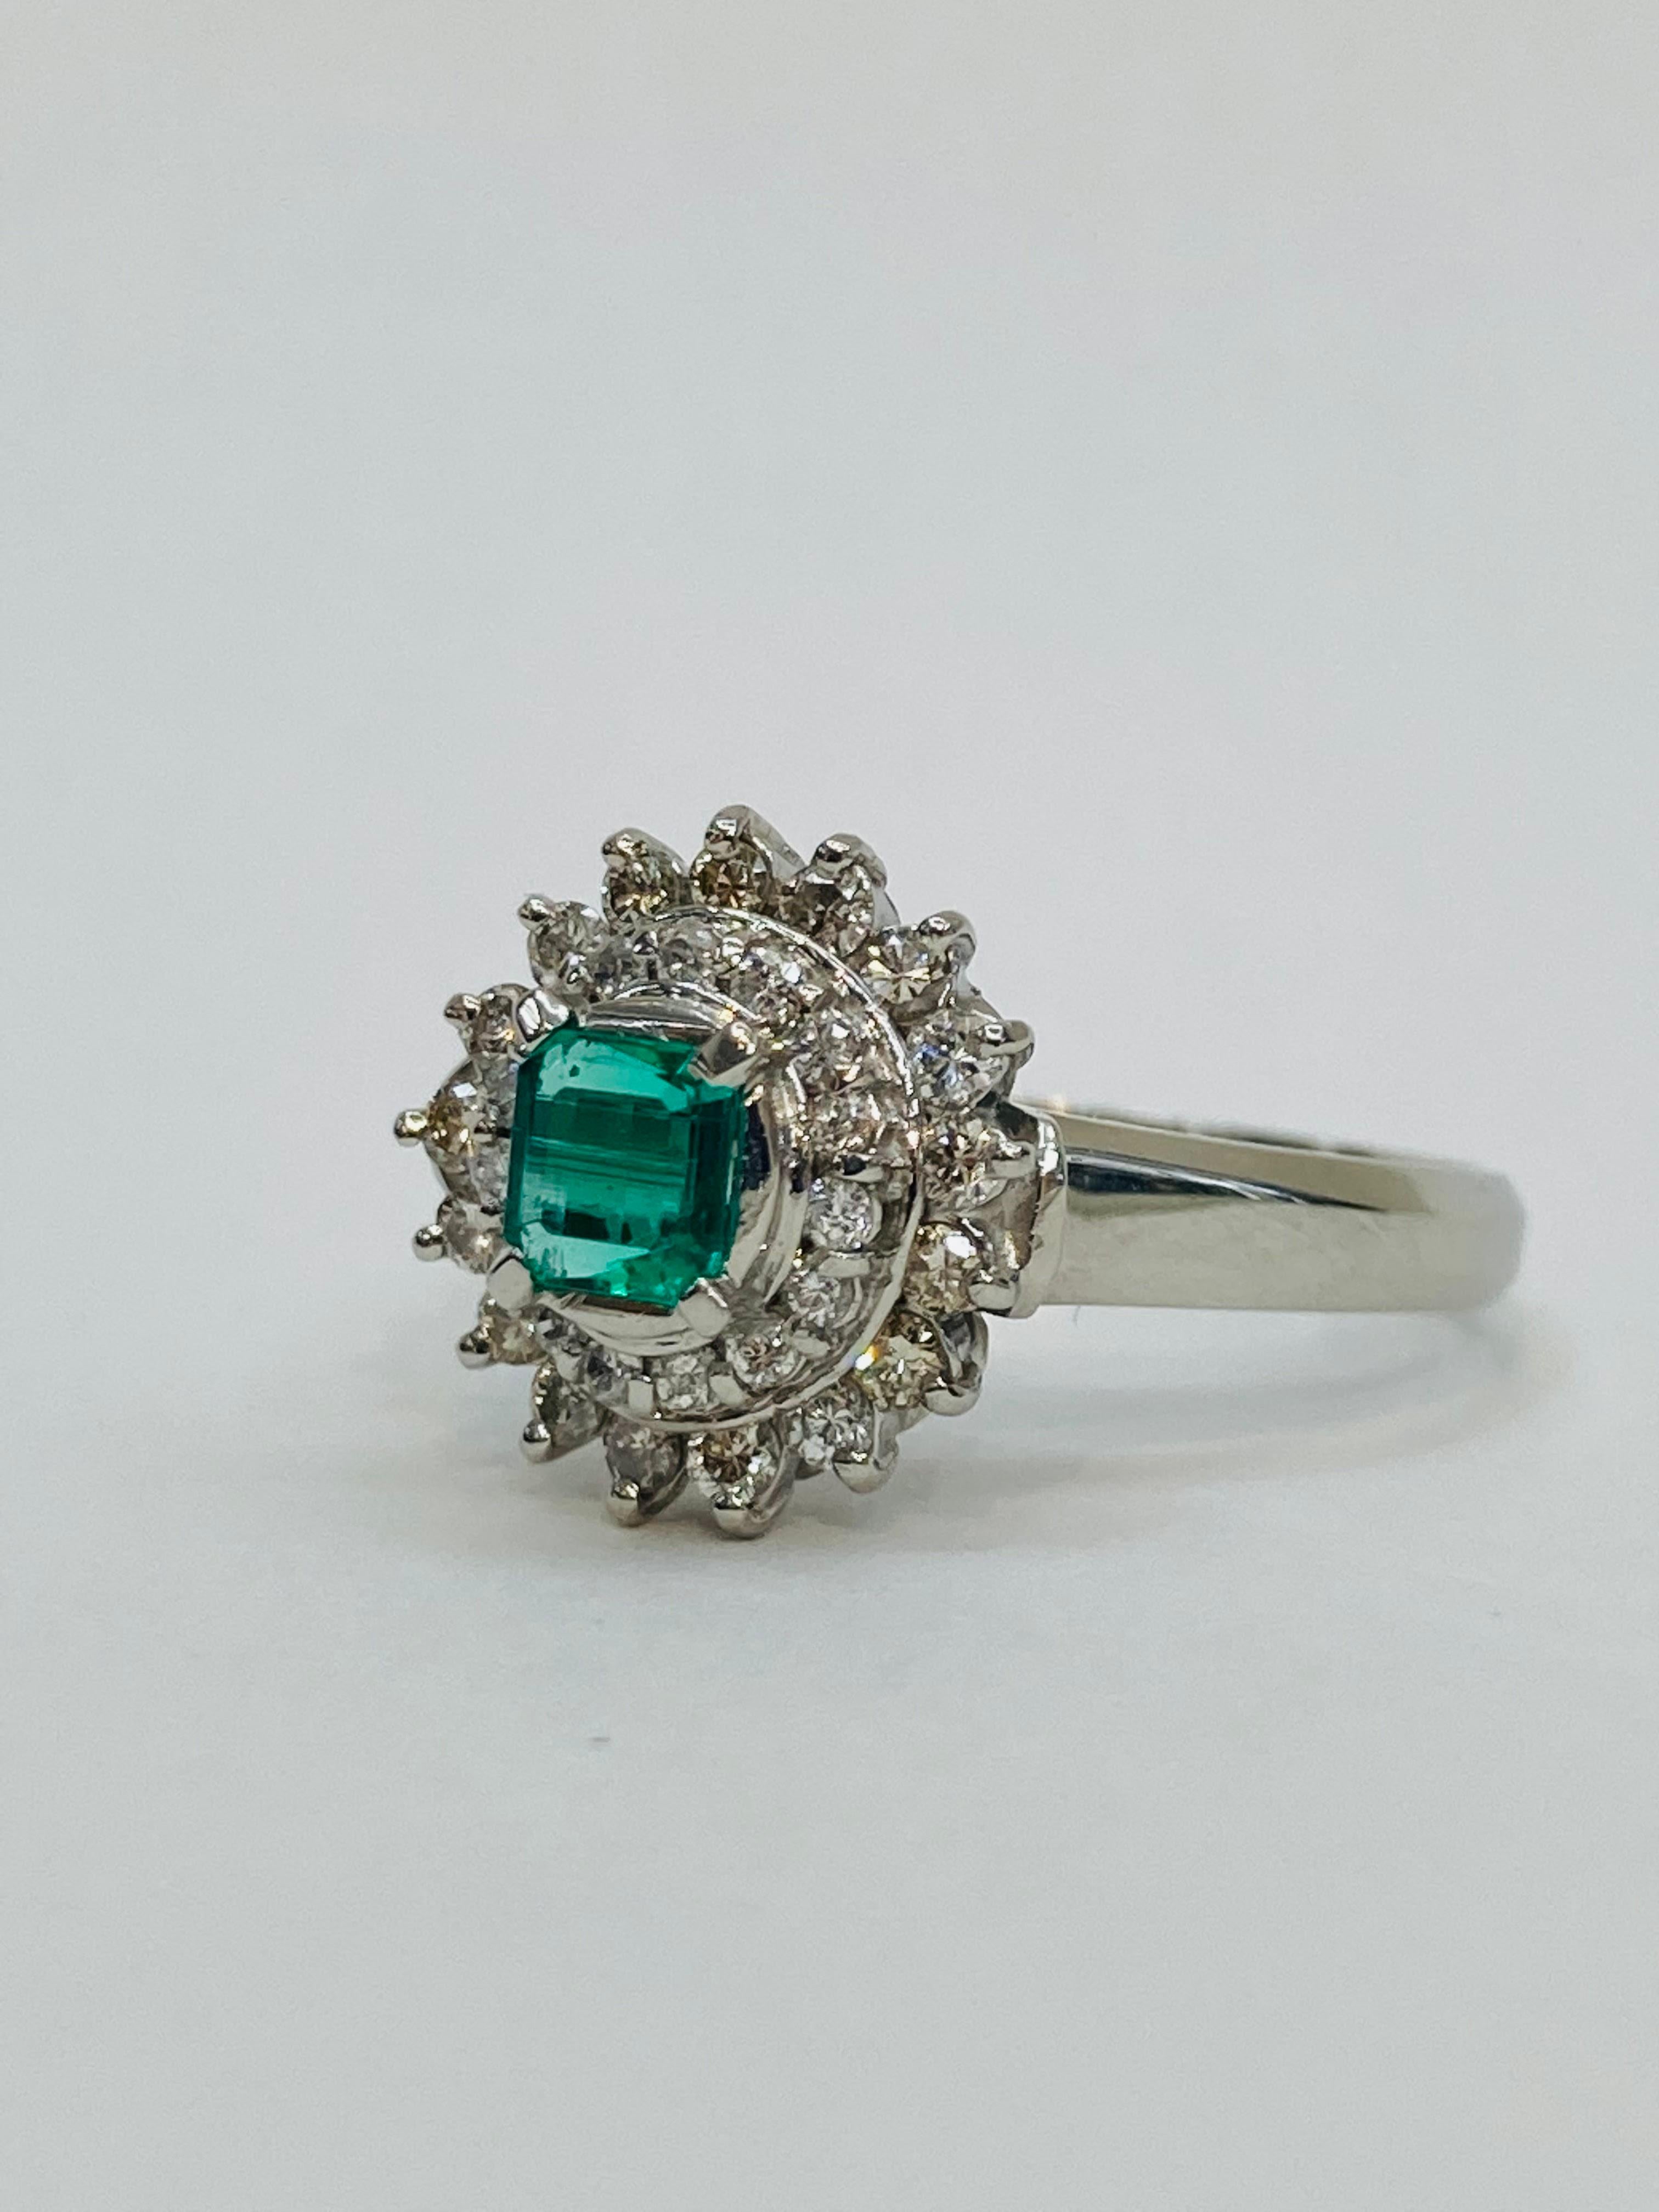 Bochic “Retro Vintage”  Natural Emerald & Platinum Diamond Cluster Ring

Natural Green Emerald  0.33 Carat 
Diamonds 0.47 Carat 
F color 
VS clarity 
Plat 900
5.25 Gram

This Ring is from the 